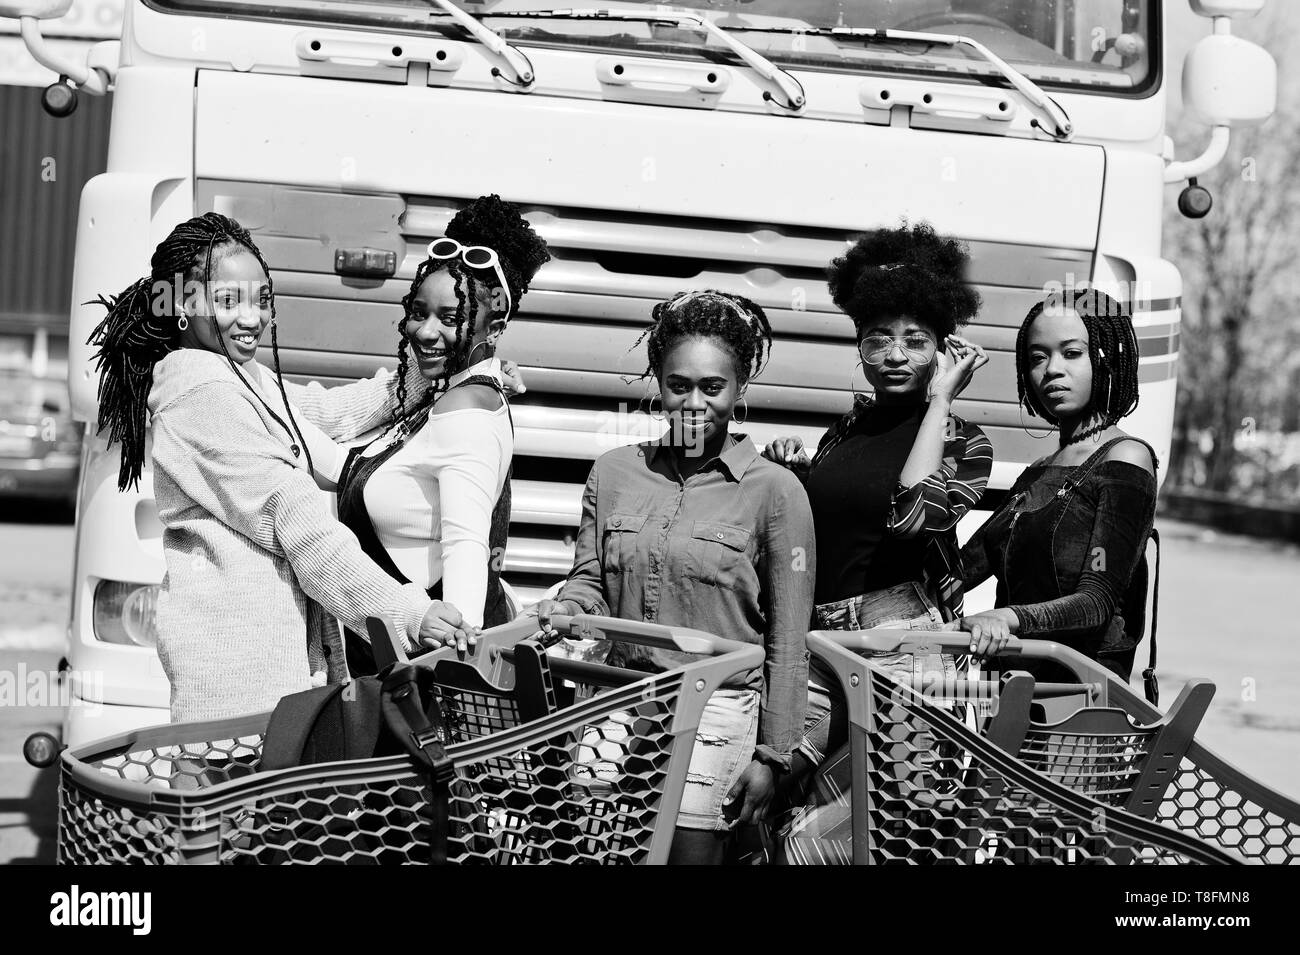 Group of five african american woman with shopping carts having fun together outdoor against truck. Stock Photo